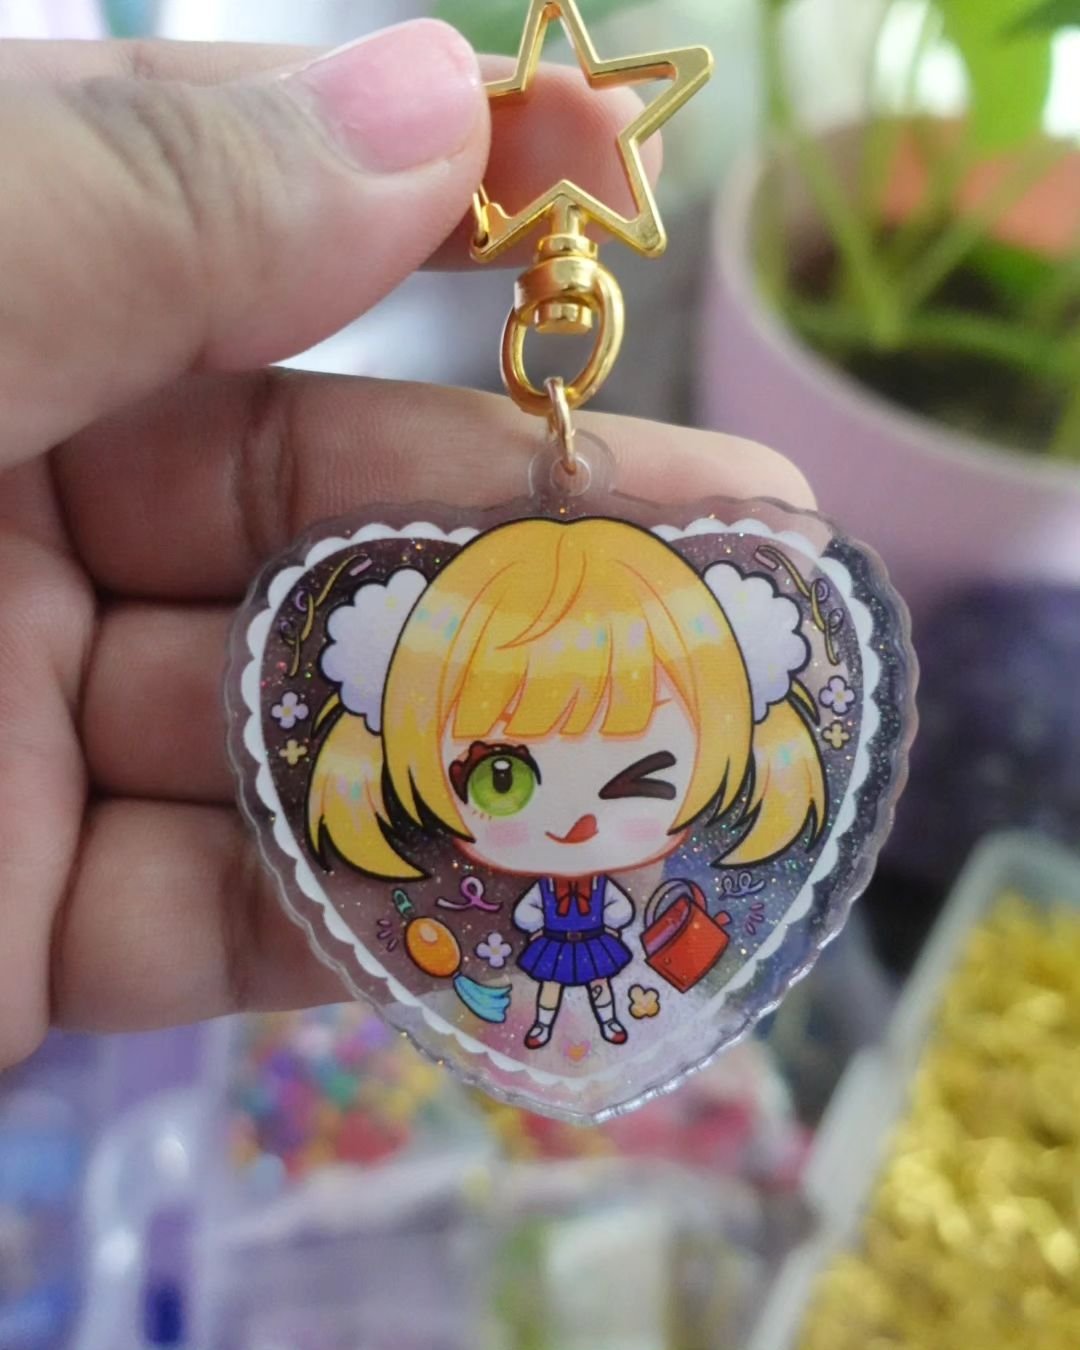 Loli God Glitter Charms 💛

I finally have a date to release these new items.
Shop update will be on Monday, May 6. I'll also be giving out discount codes so stay tuned.